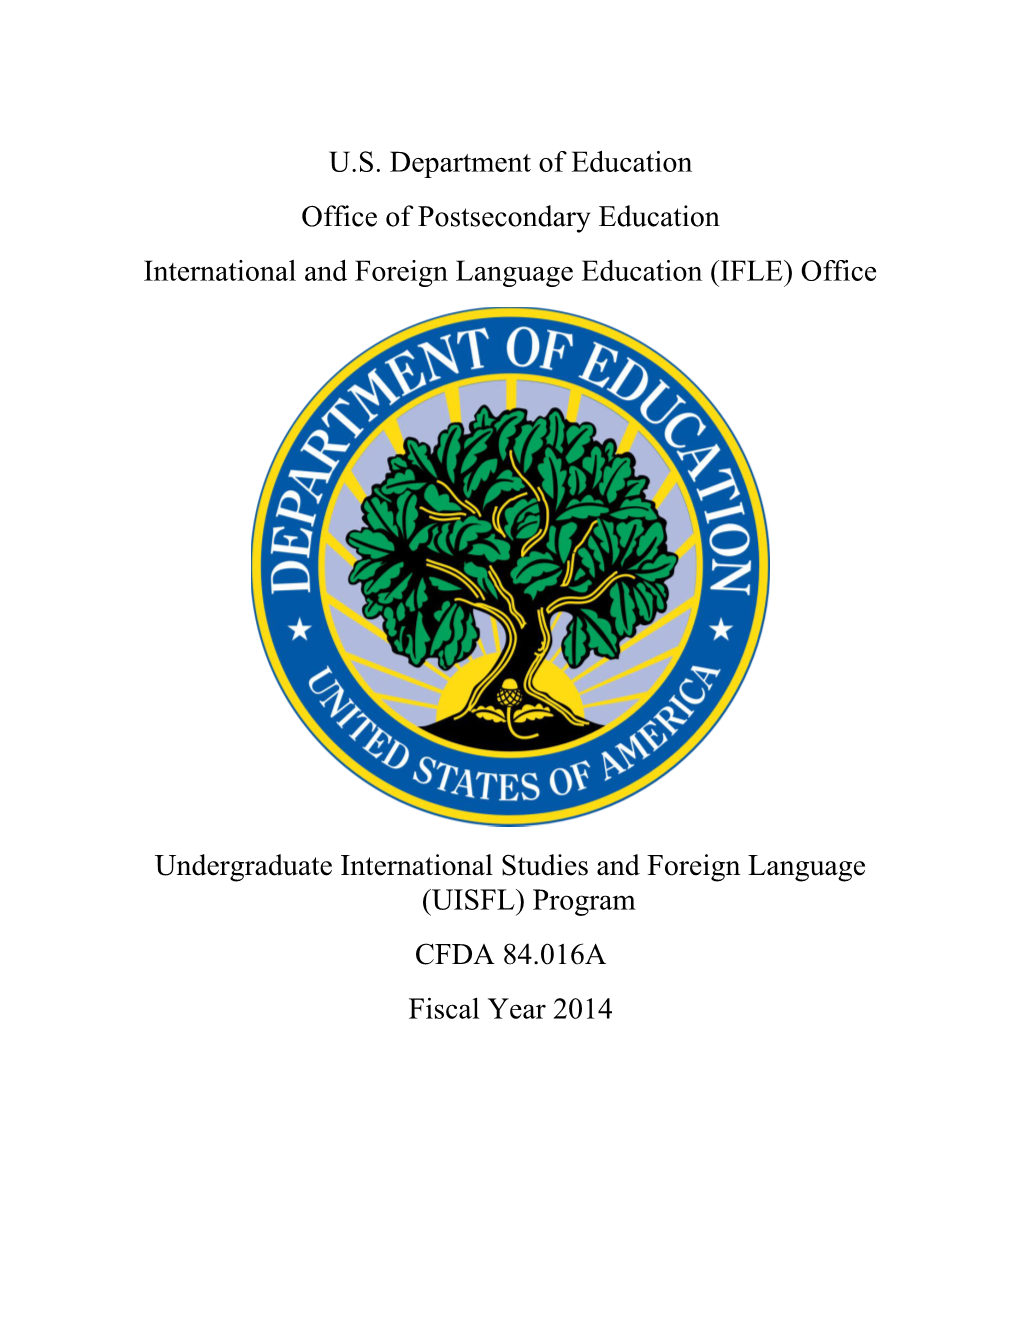 FY 2014 Project Abstracts Under the Undergraduate International Studies and Foreign Language